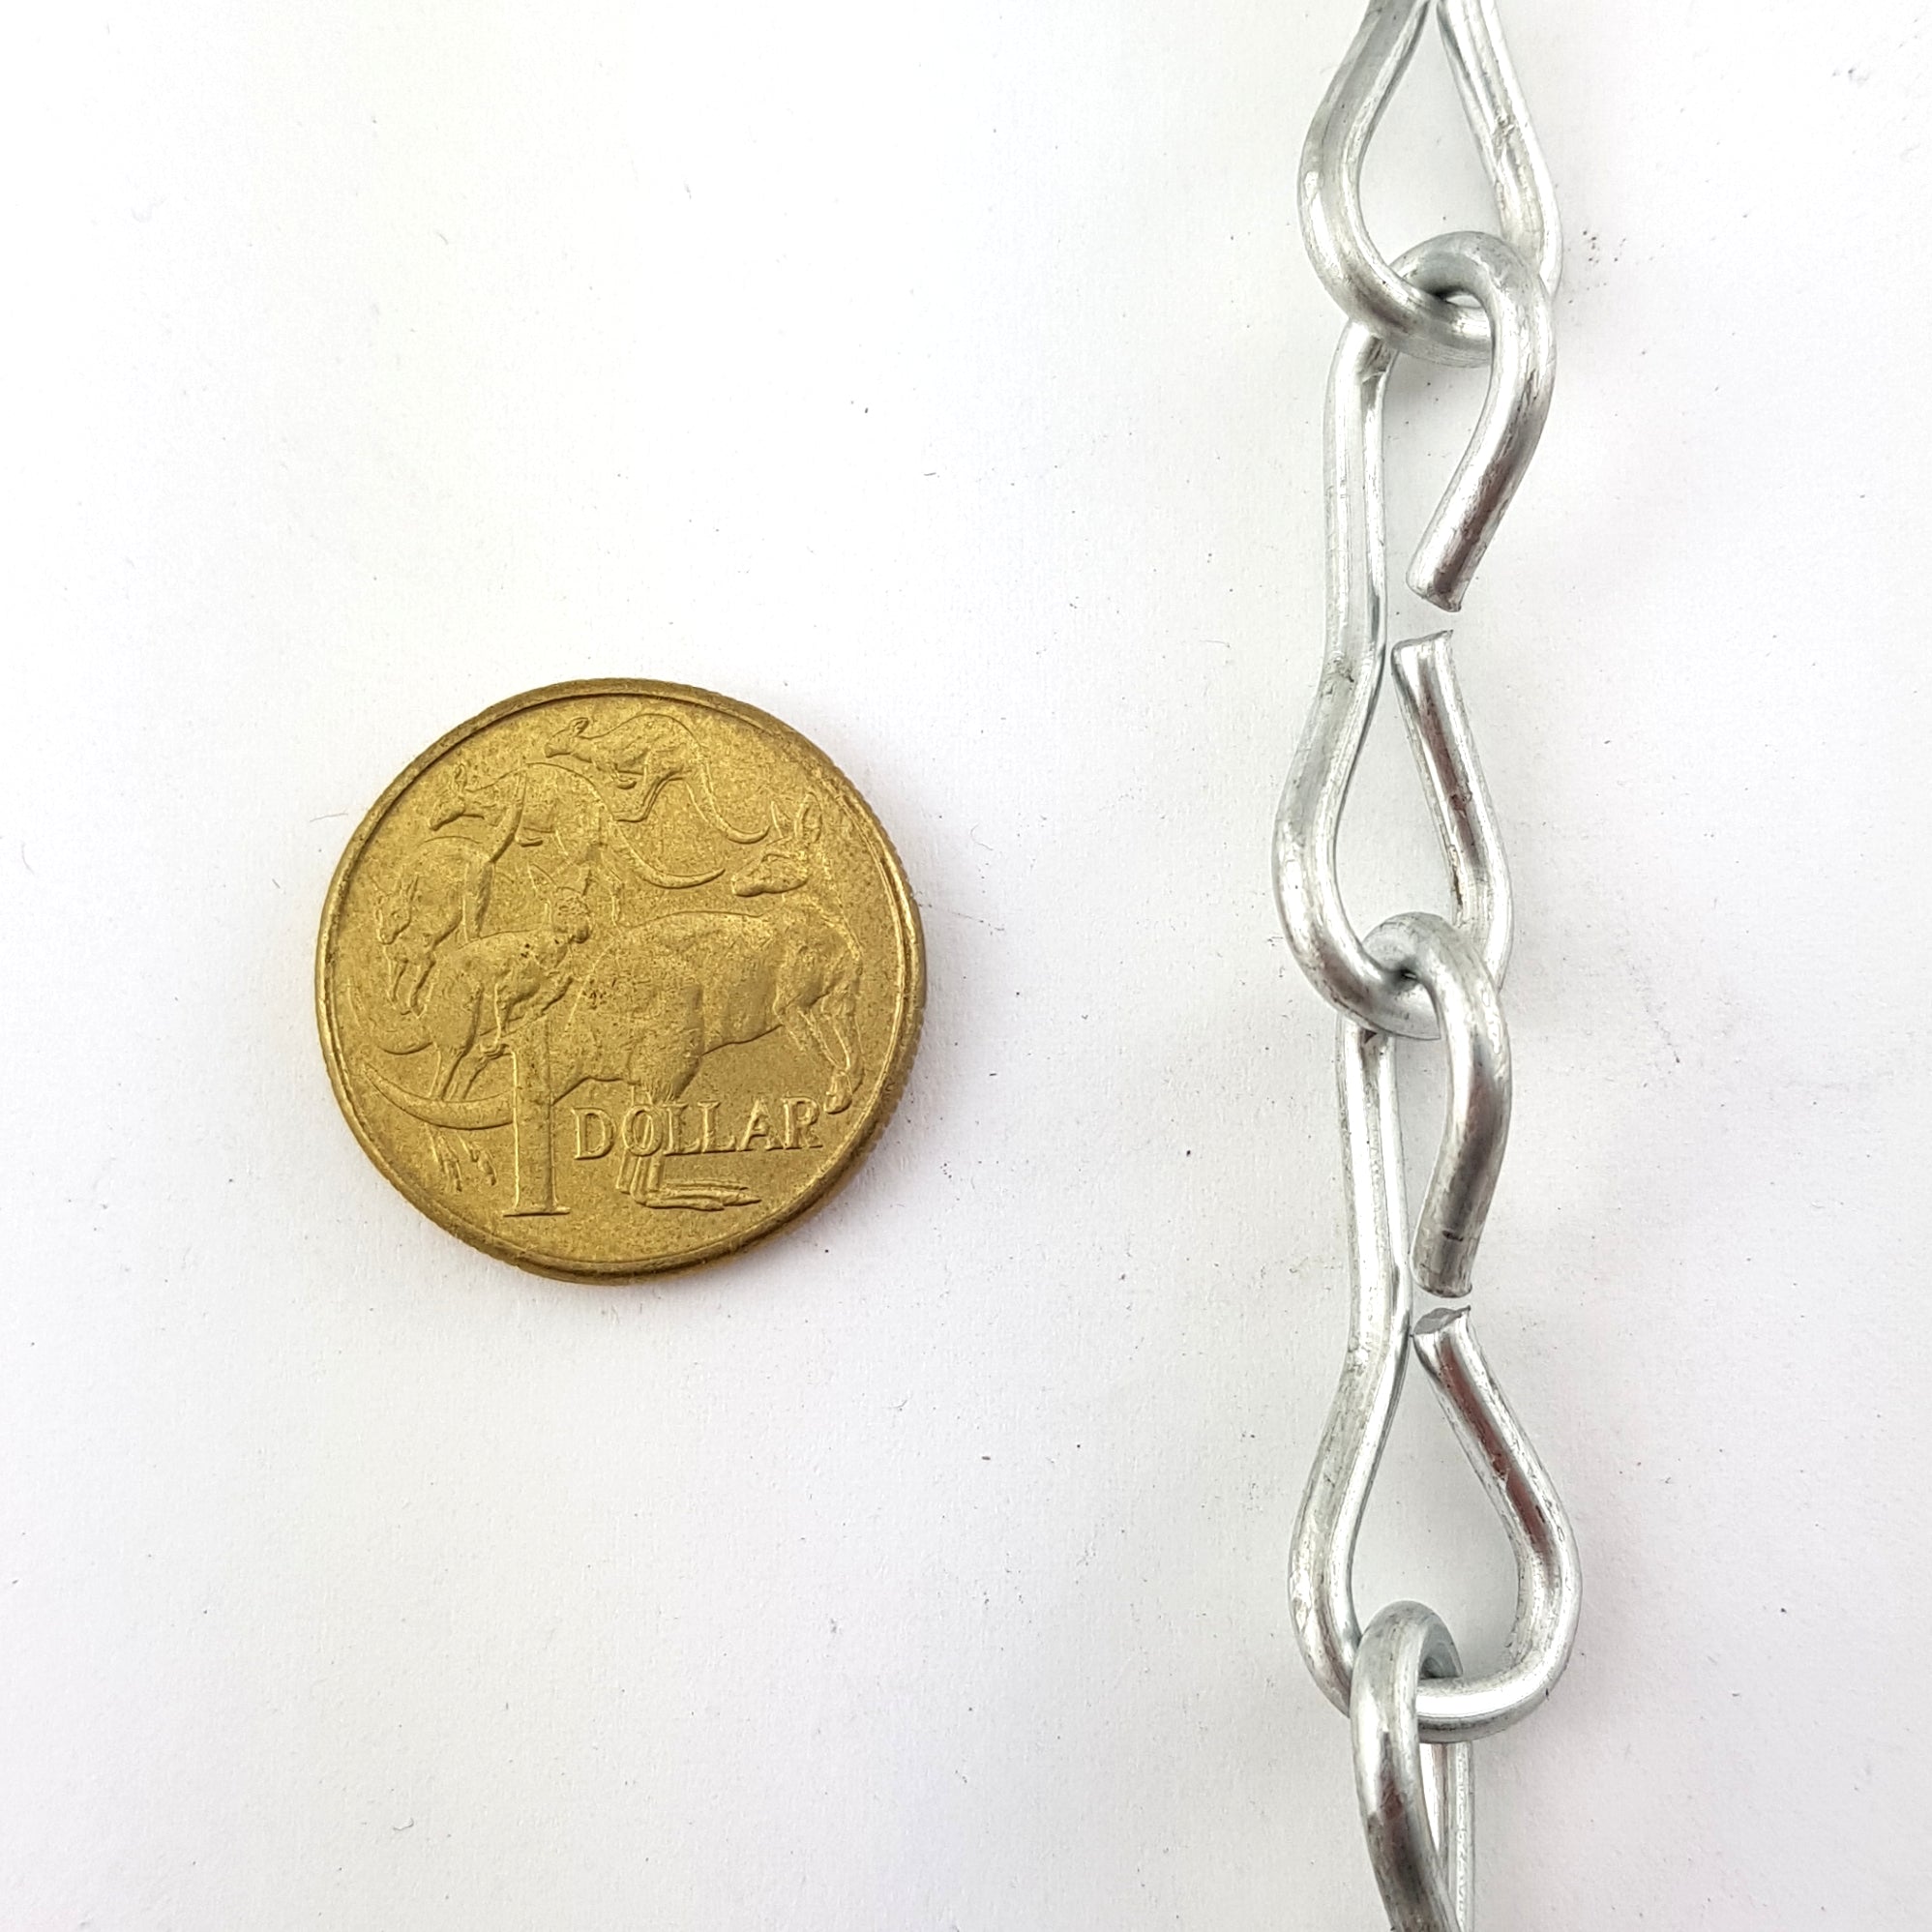 Australian made Single Jack Chain in galvanised finish, size 2.5mm and quantity of 50 metres. Melbourne, Australia.